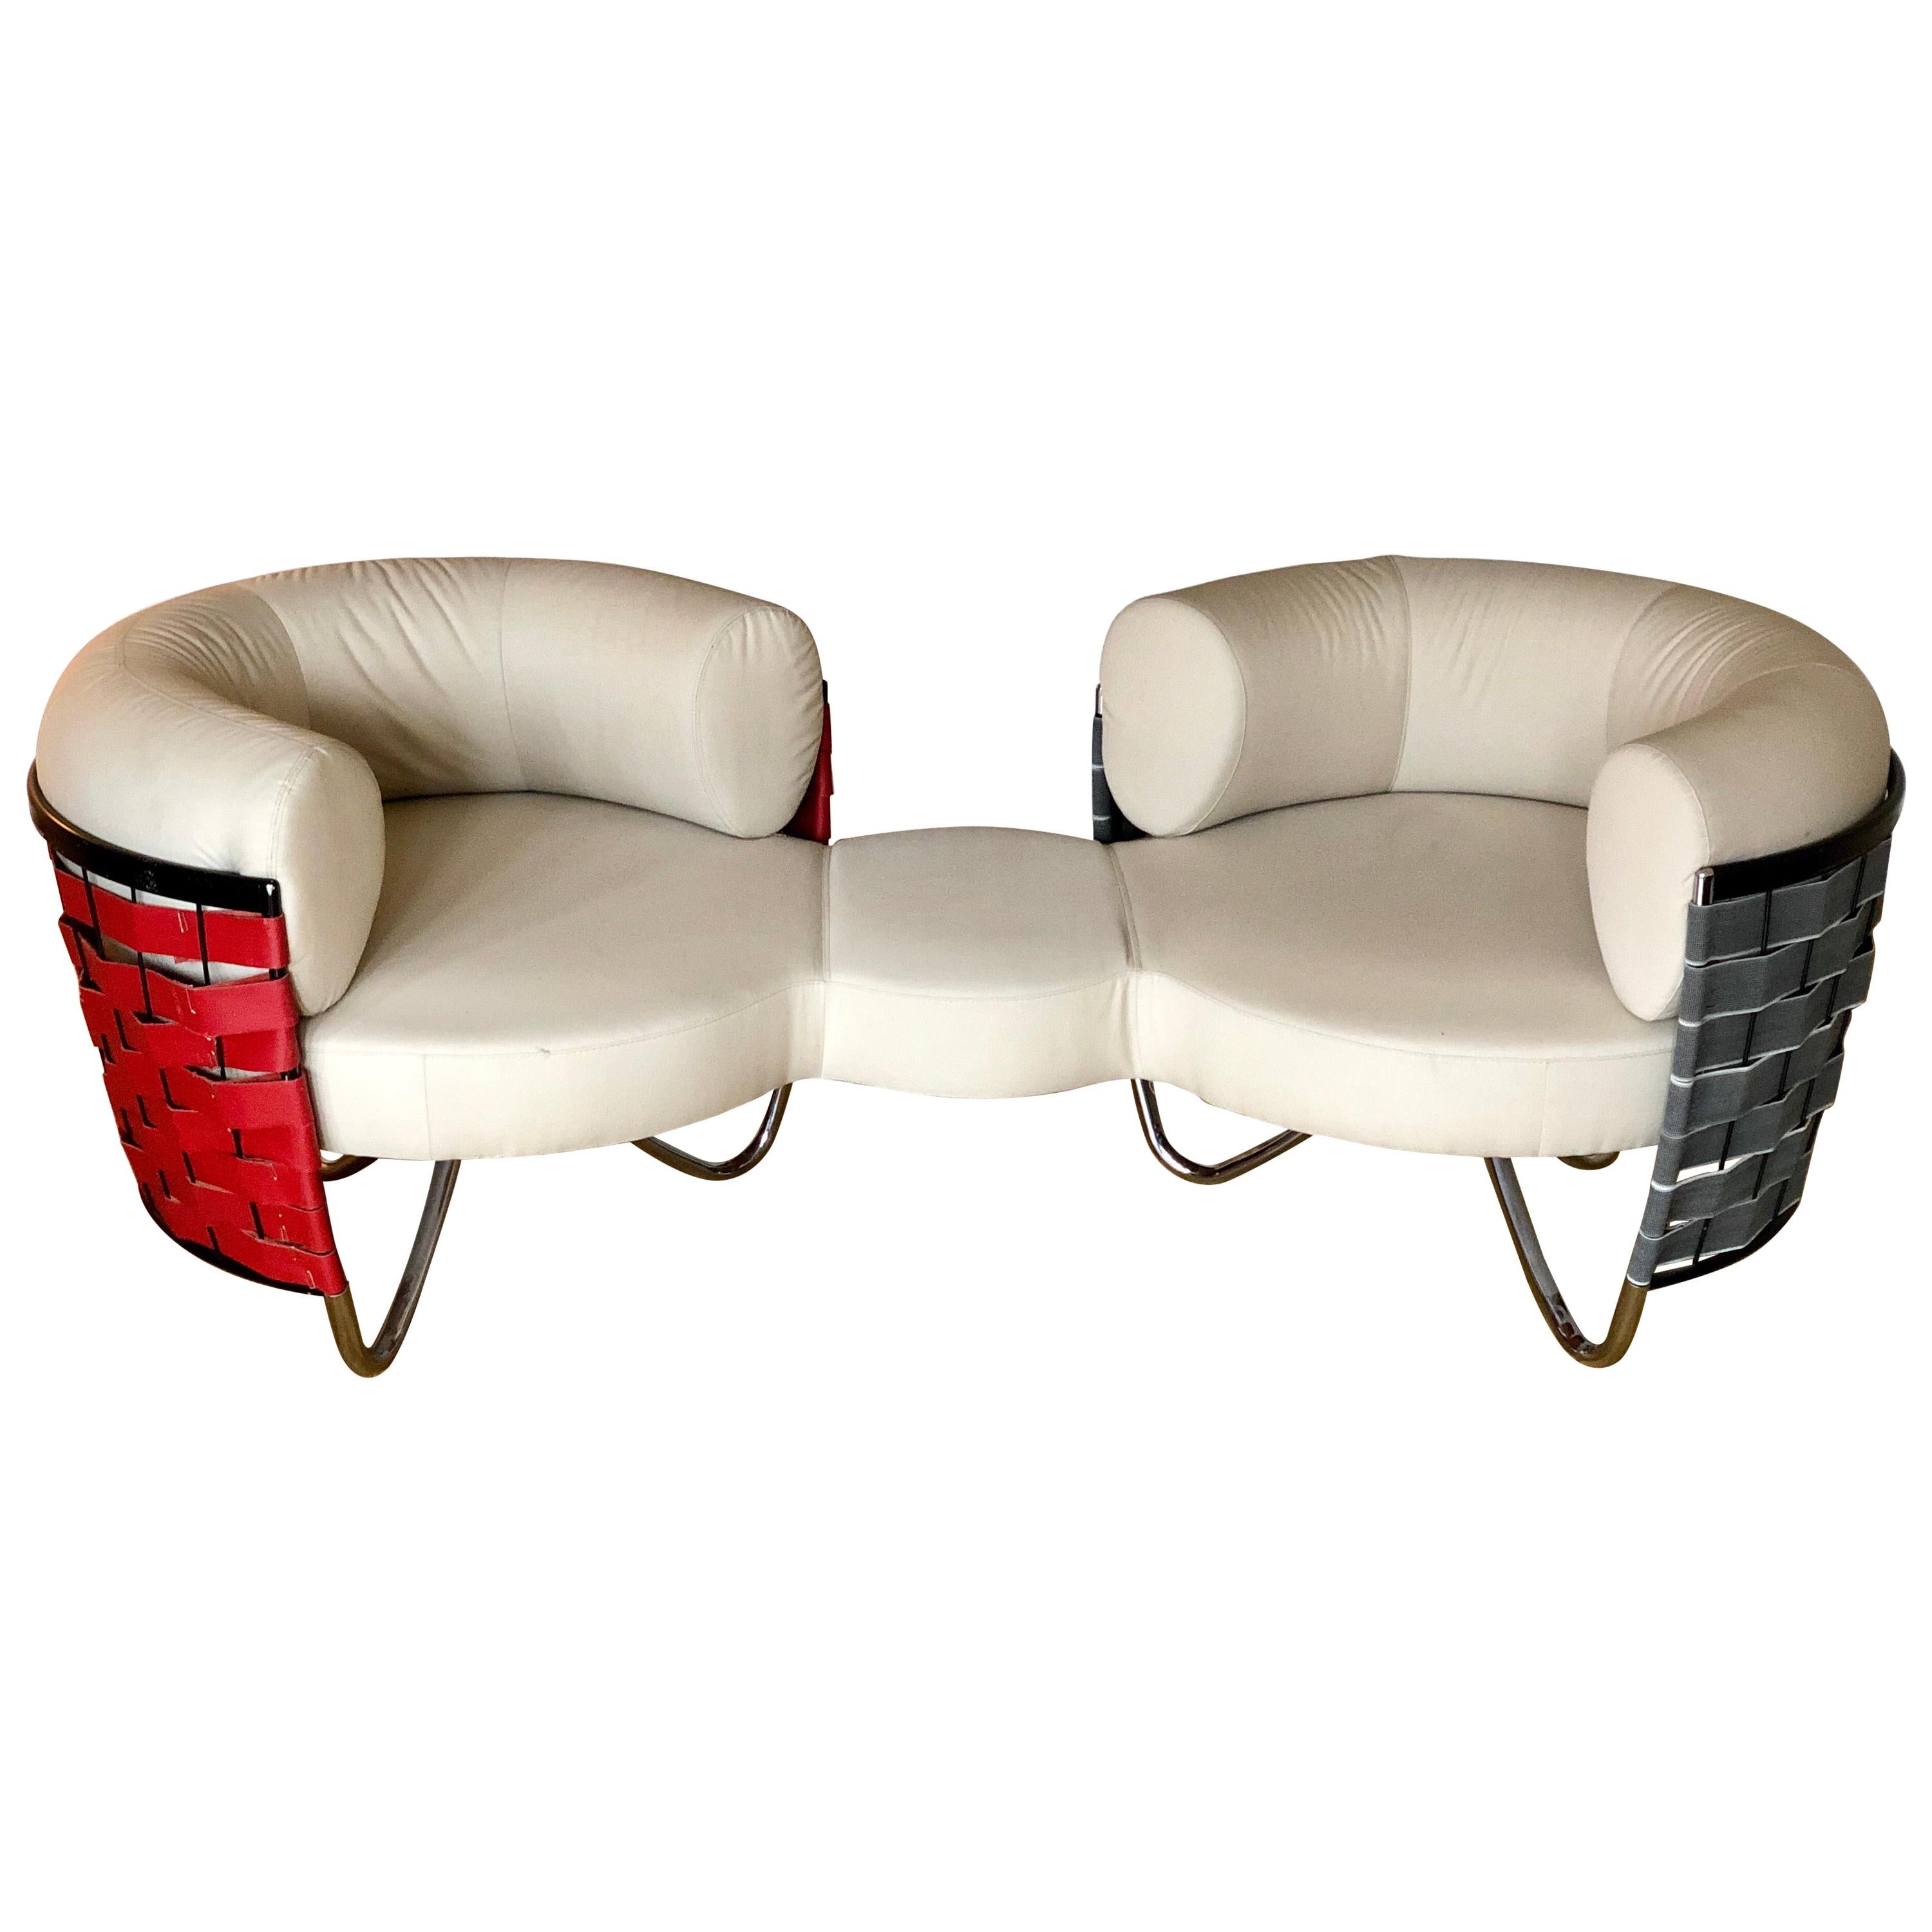 Sale Curved Swiss Design Prototype Beige Round Shape Couch / Sofa